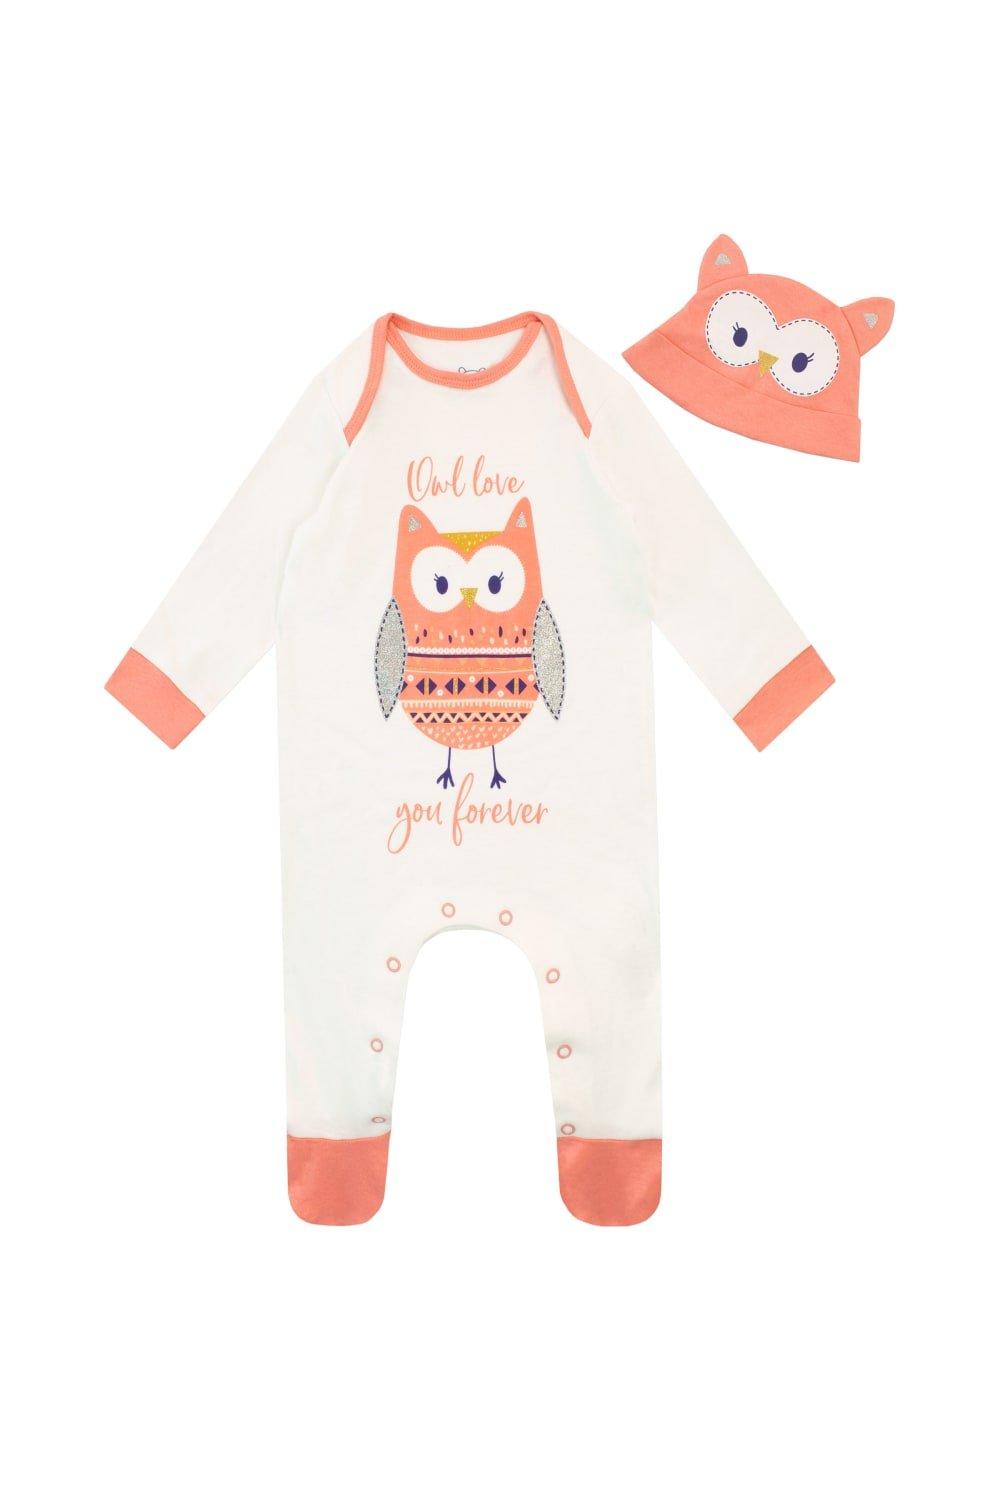 Baby Owl Love You Forever Sleepsuit and Hat Set